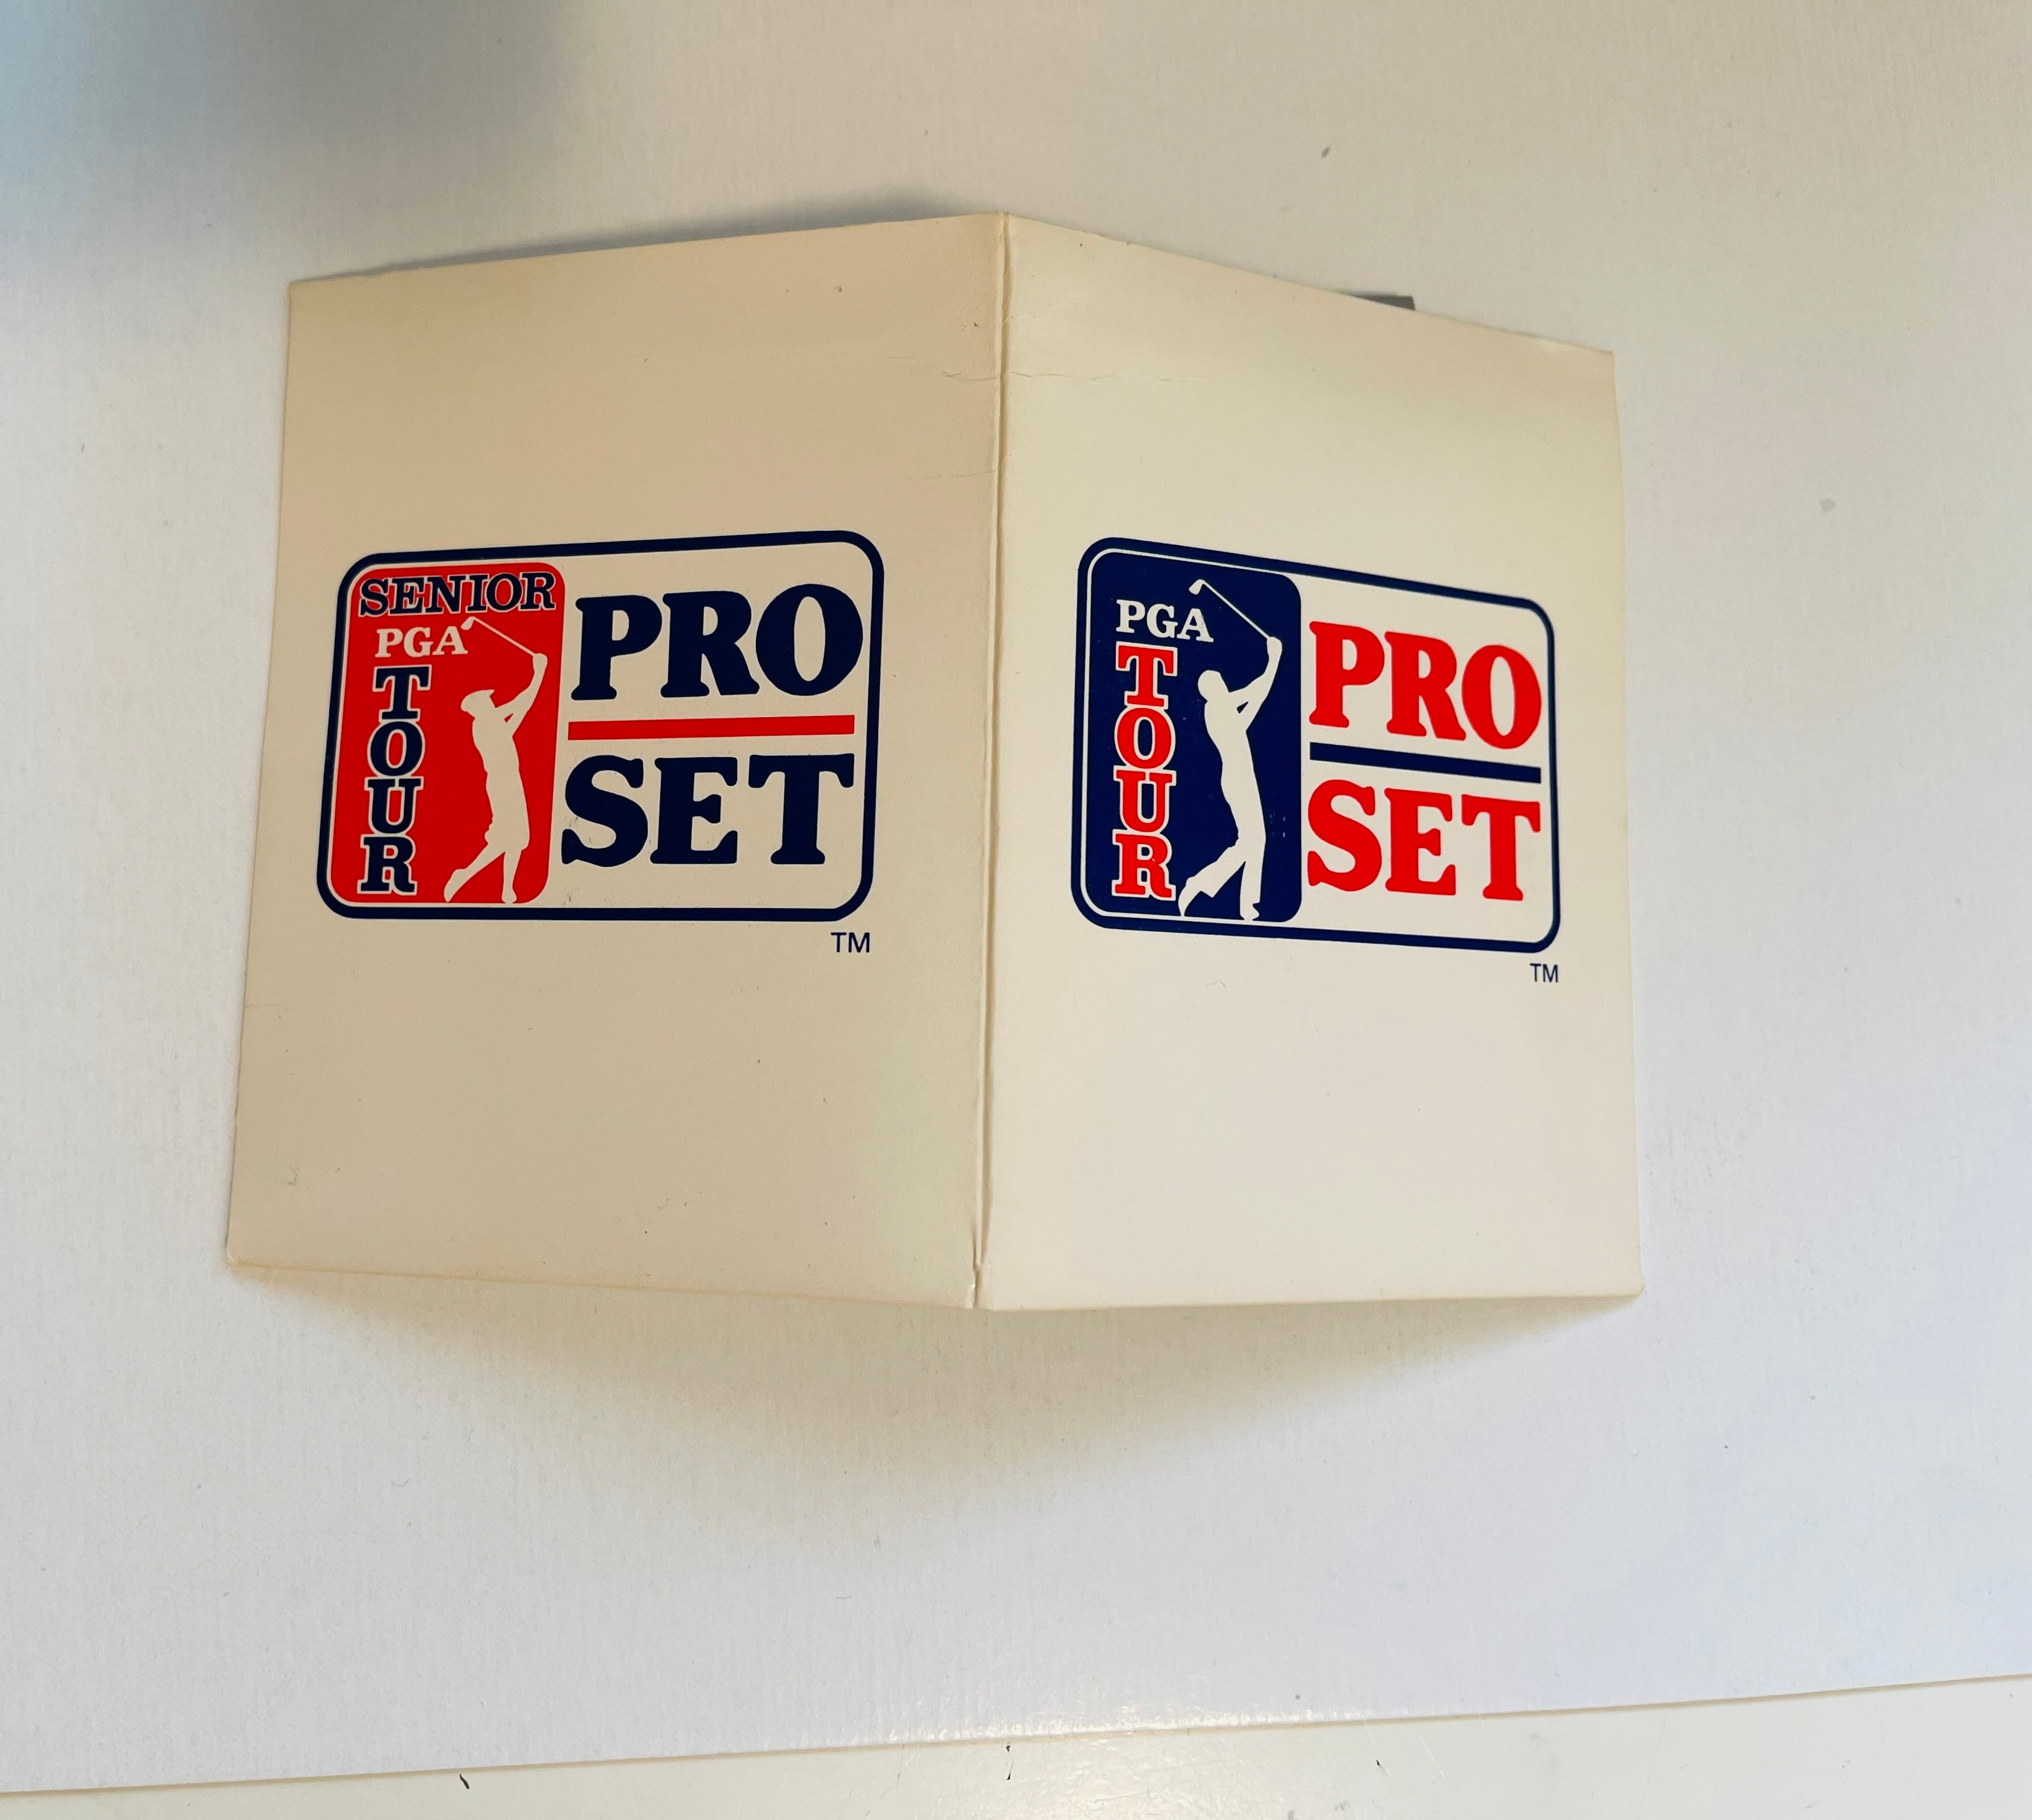 Golf PGA Proset two cards promotional set Trevino and Tway 1990